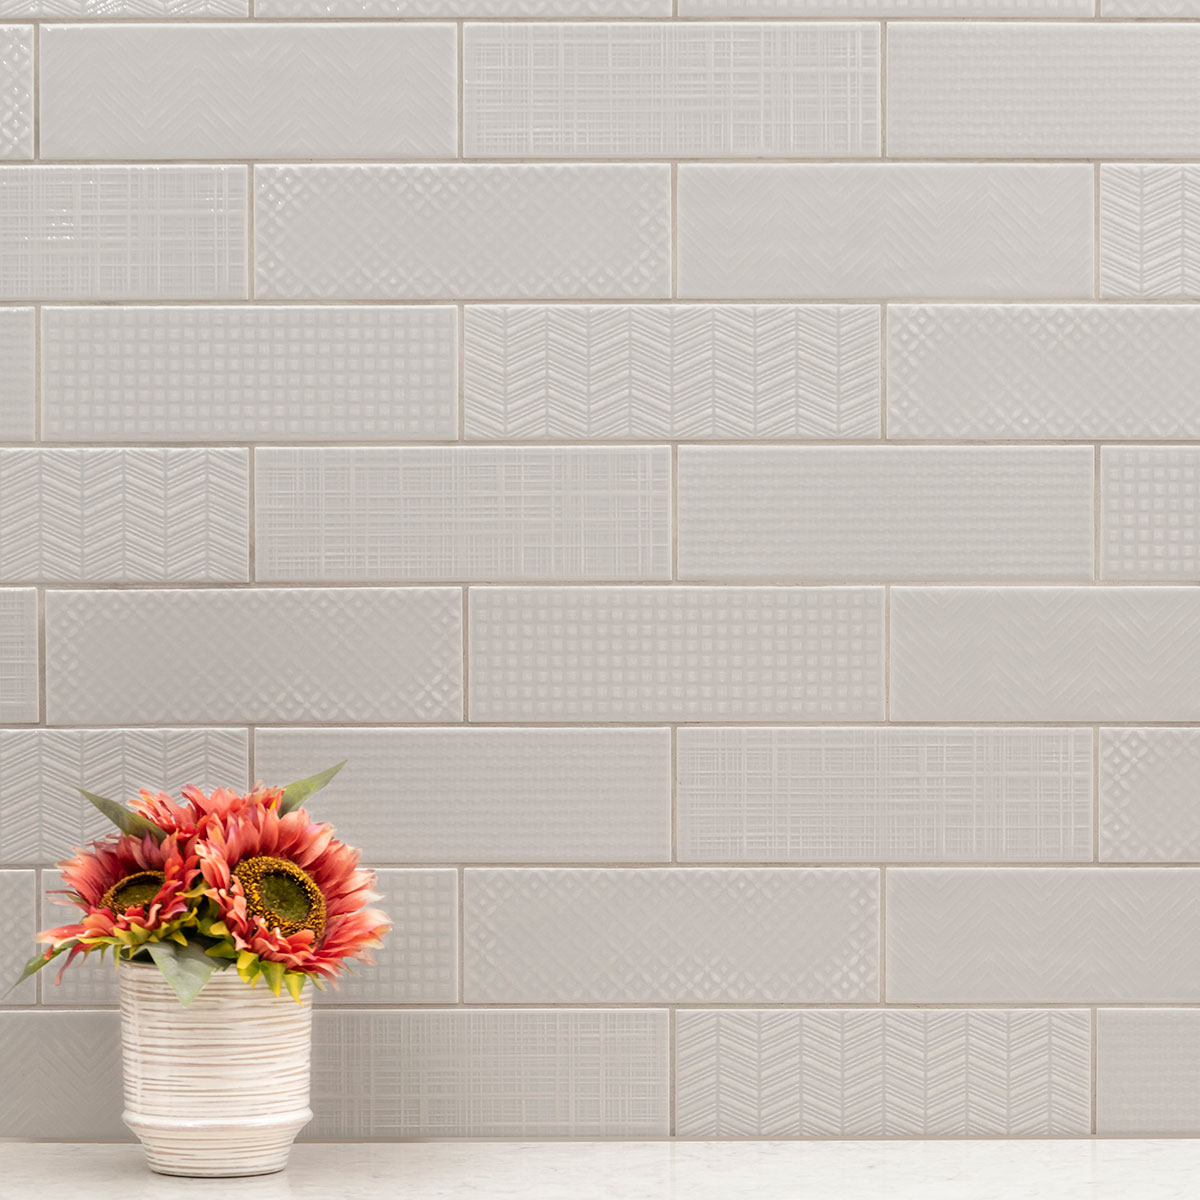 Urbano Dusk 3d Mix Tile wall in kitchen